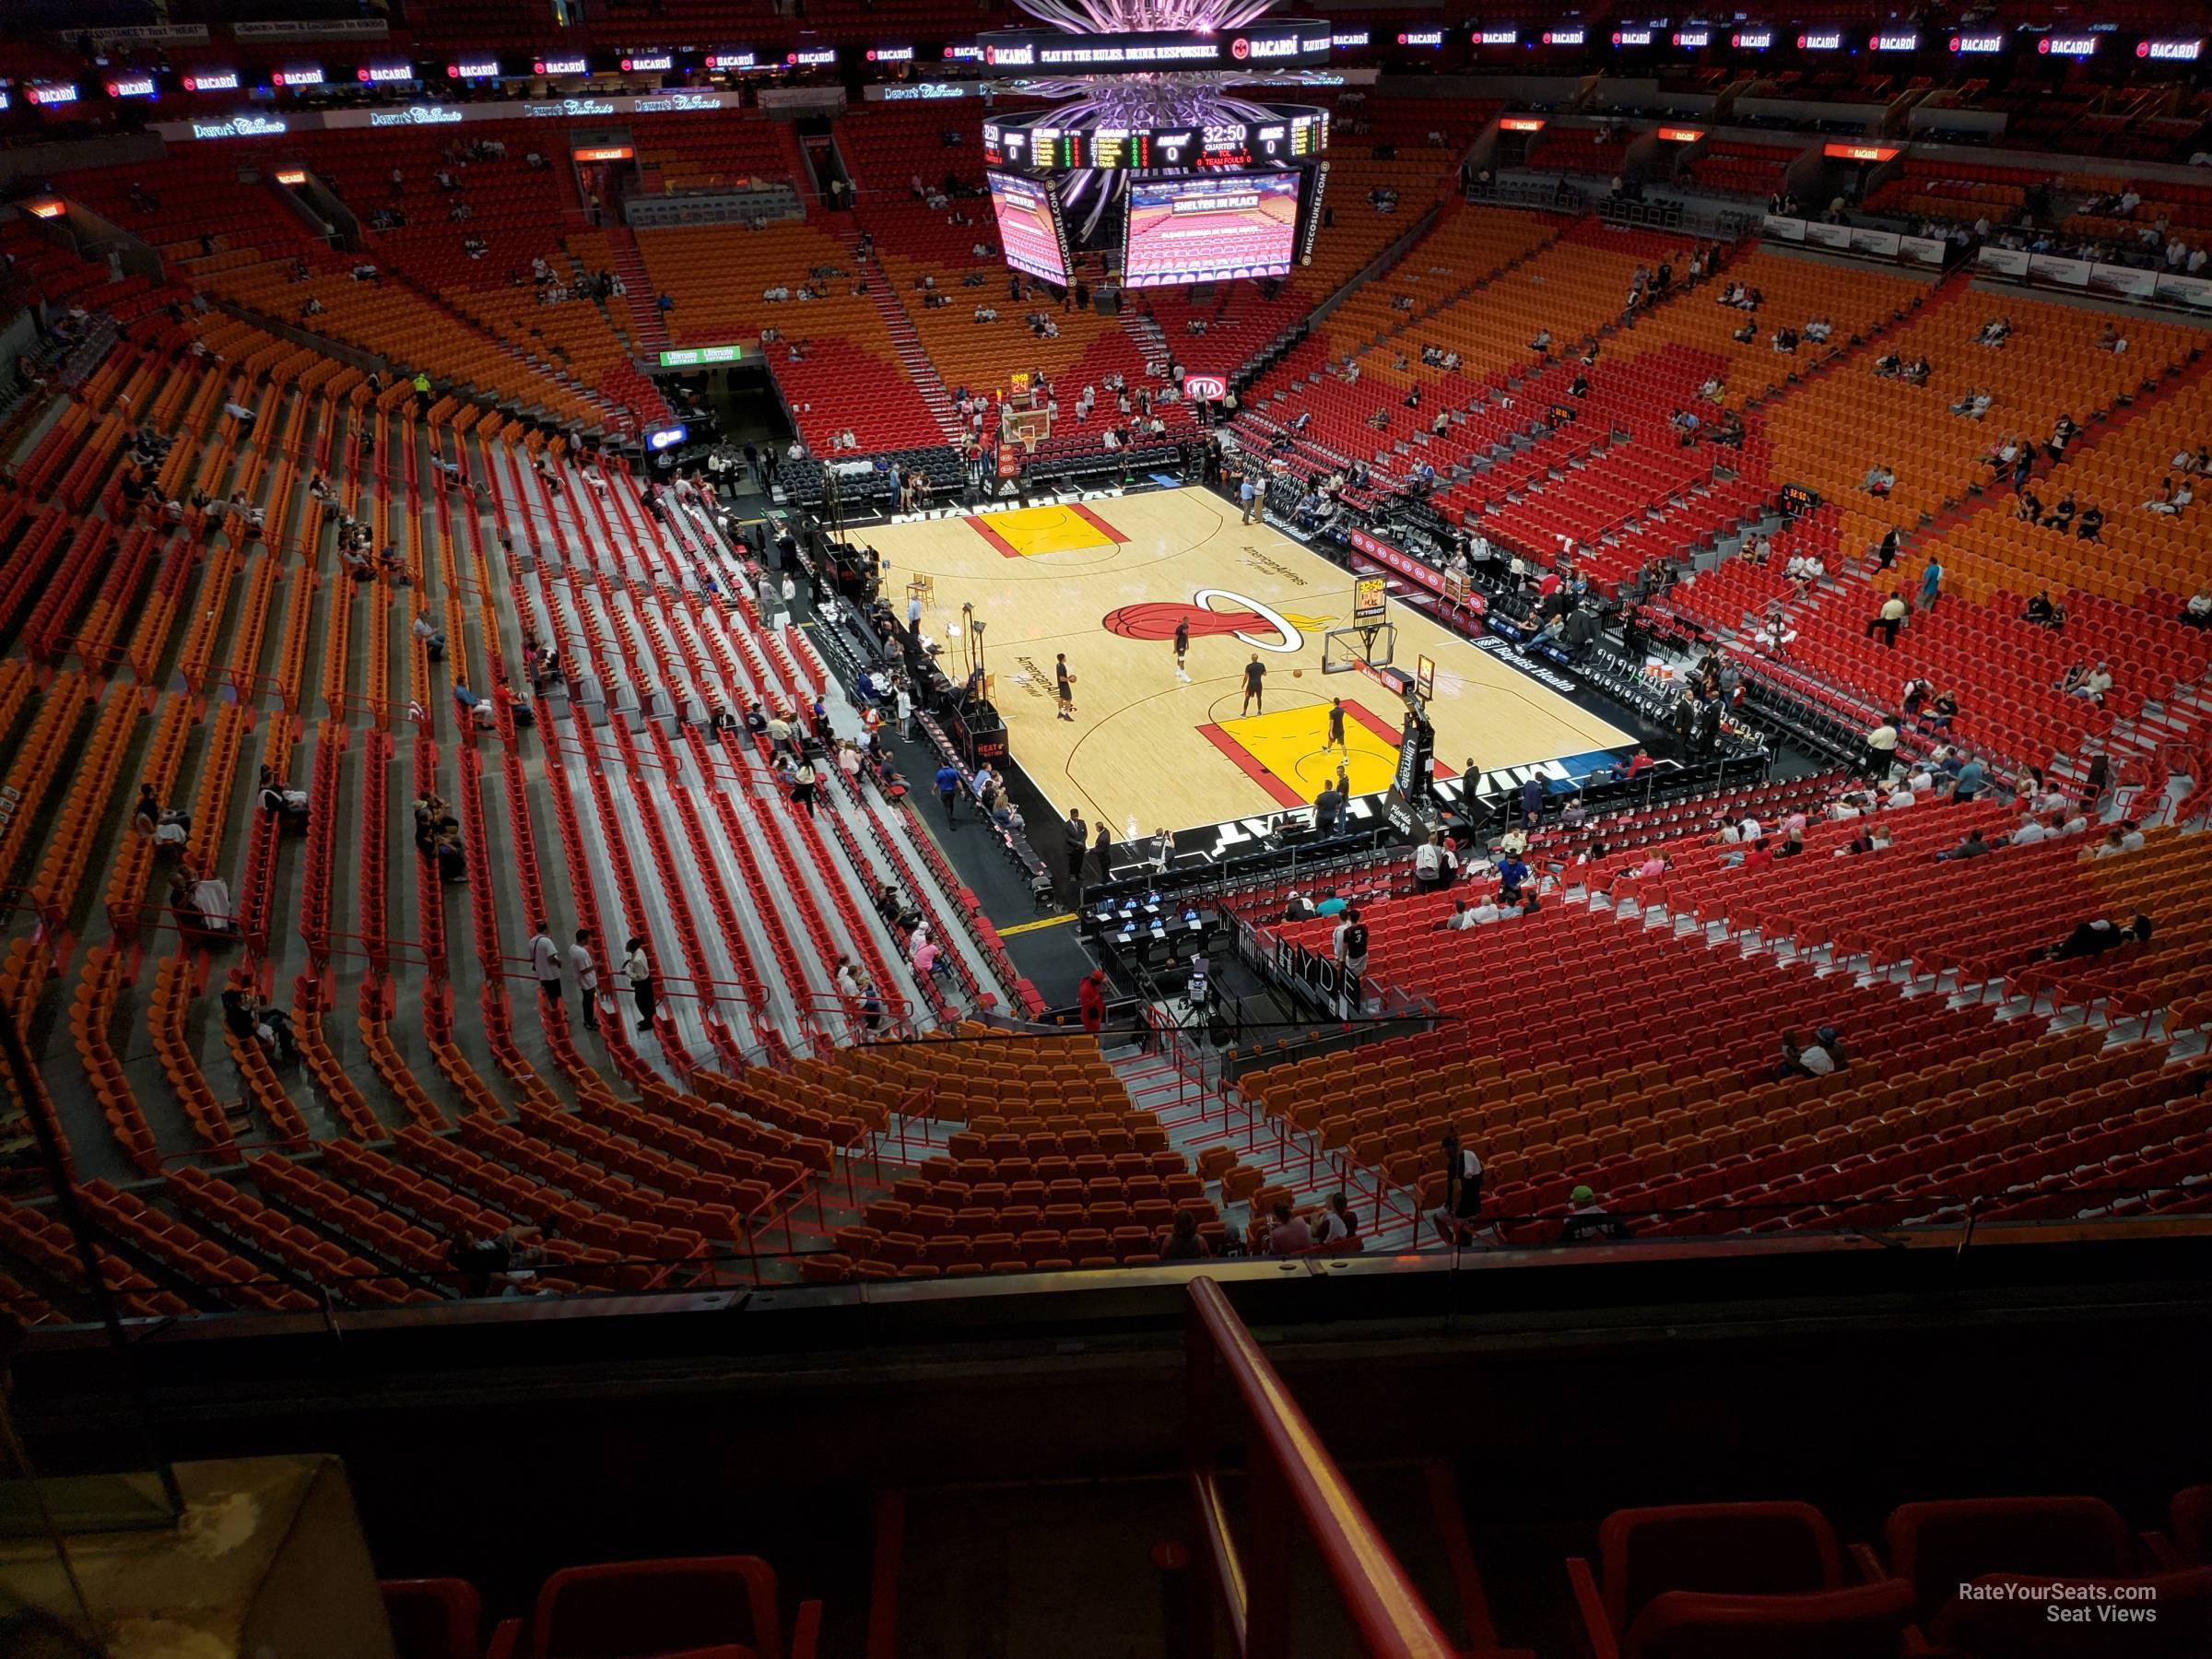 section 319, row 3 seat view  for basketball - miami-dade arena